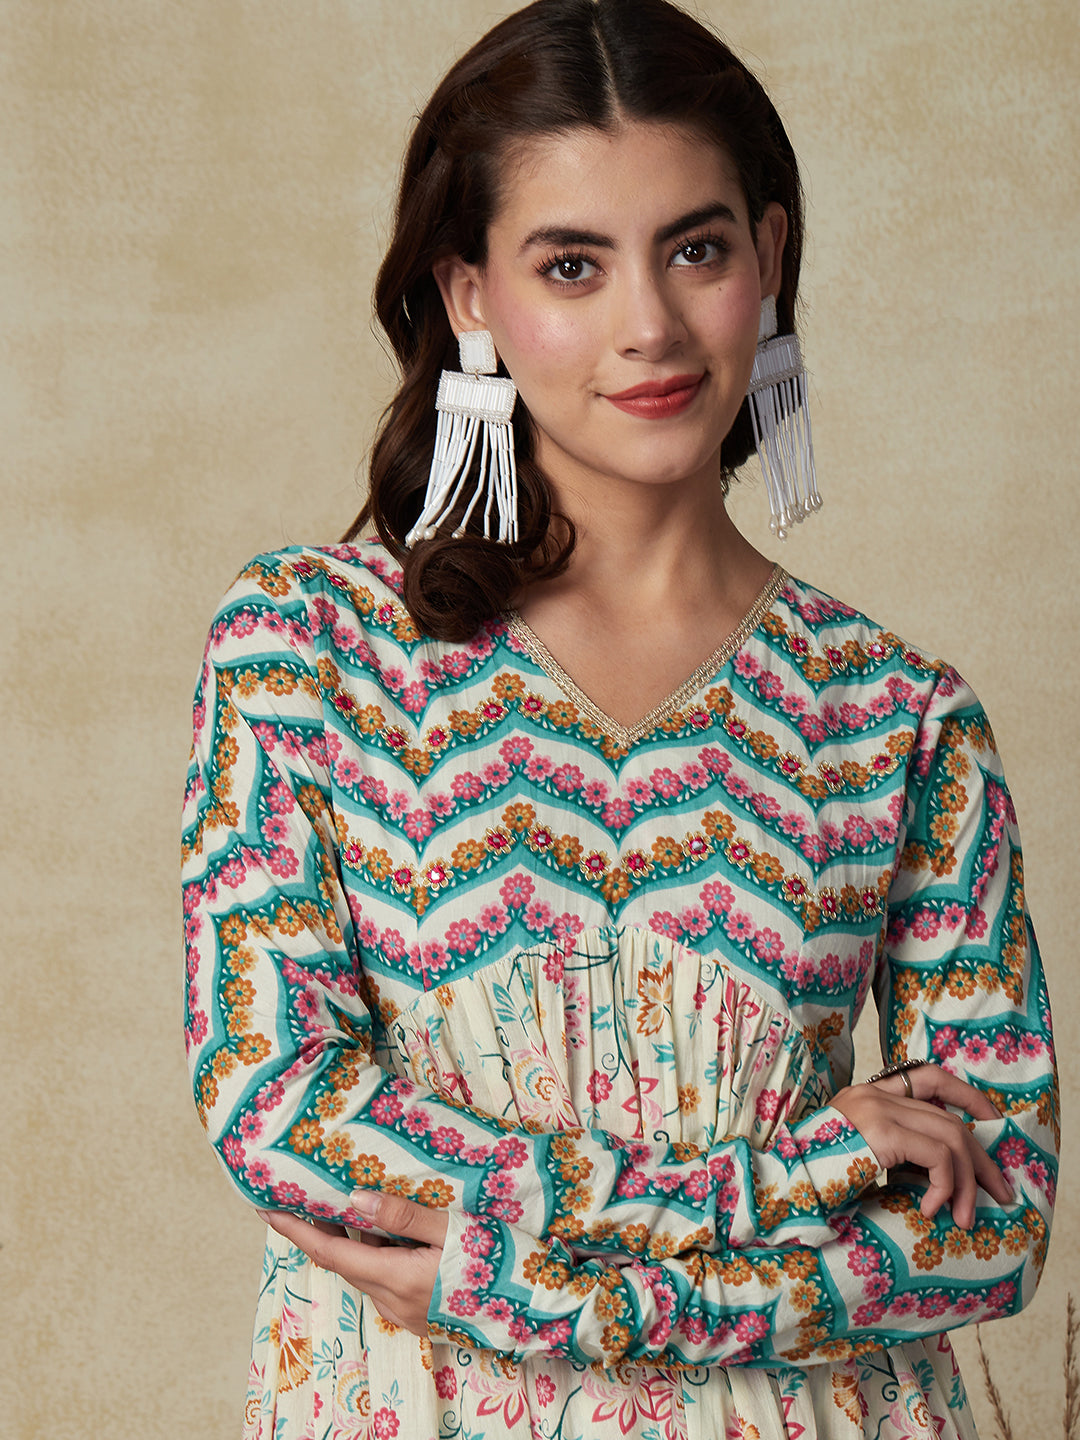 Ethnic & Chevron Printed & Embroidered A-Line Pleated Kurta with Palazzo - Off White